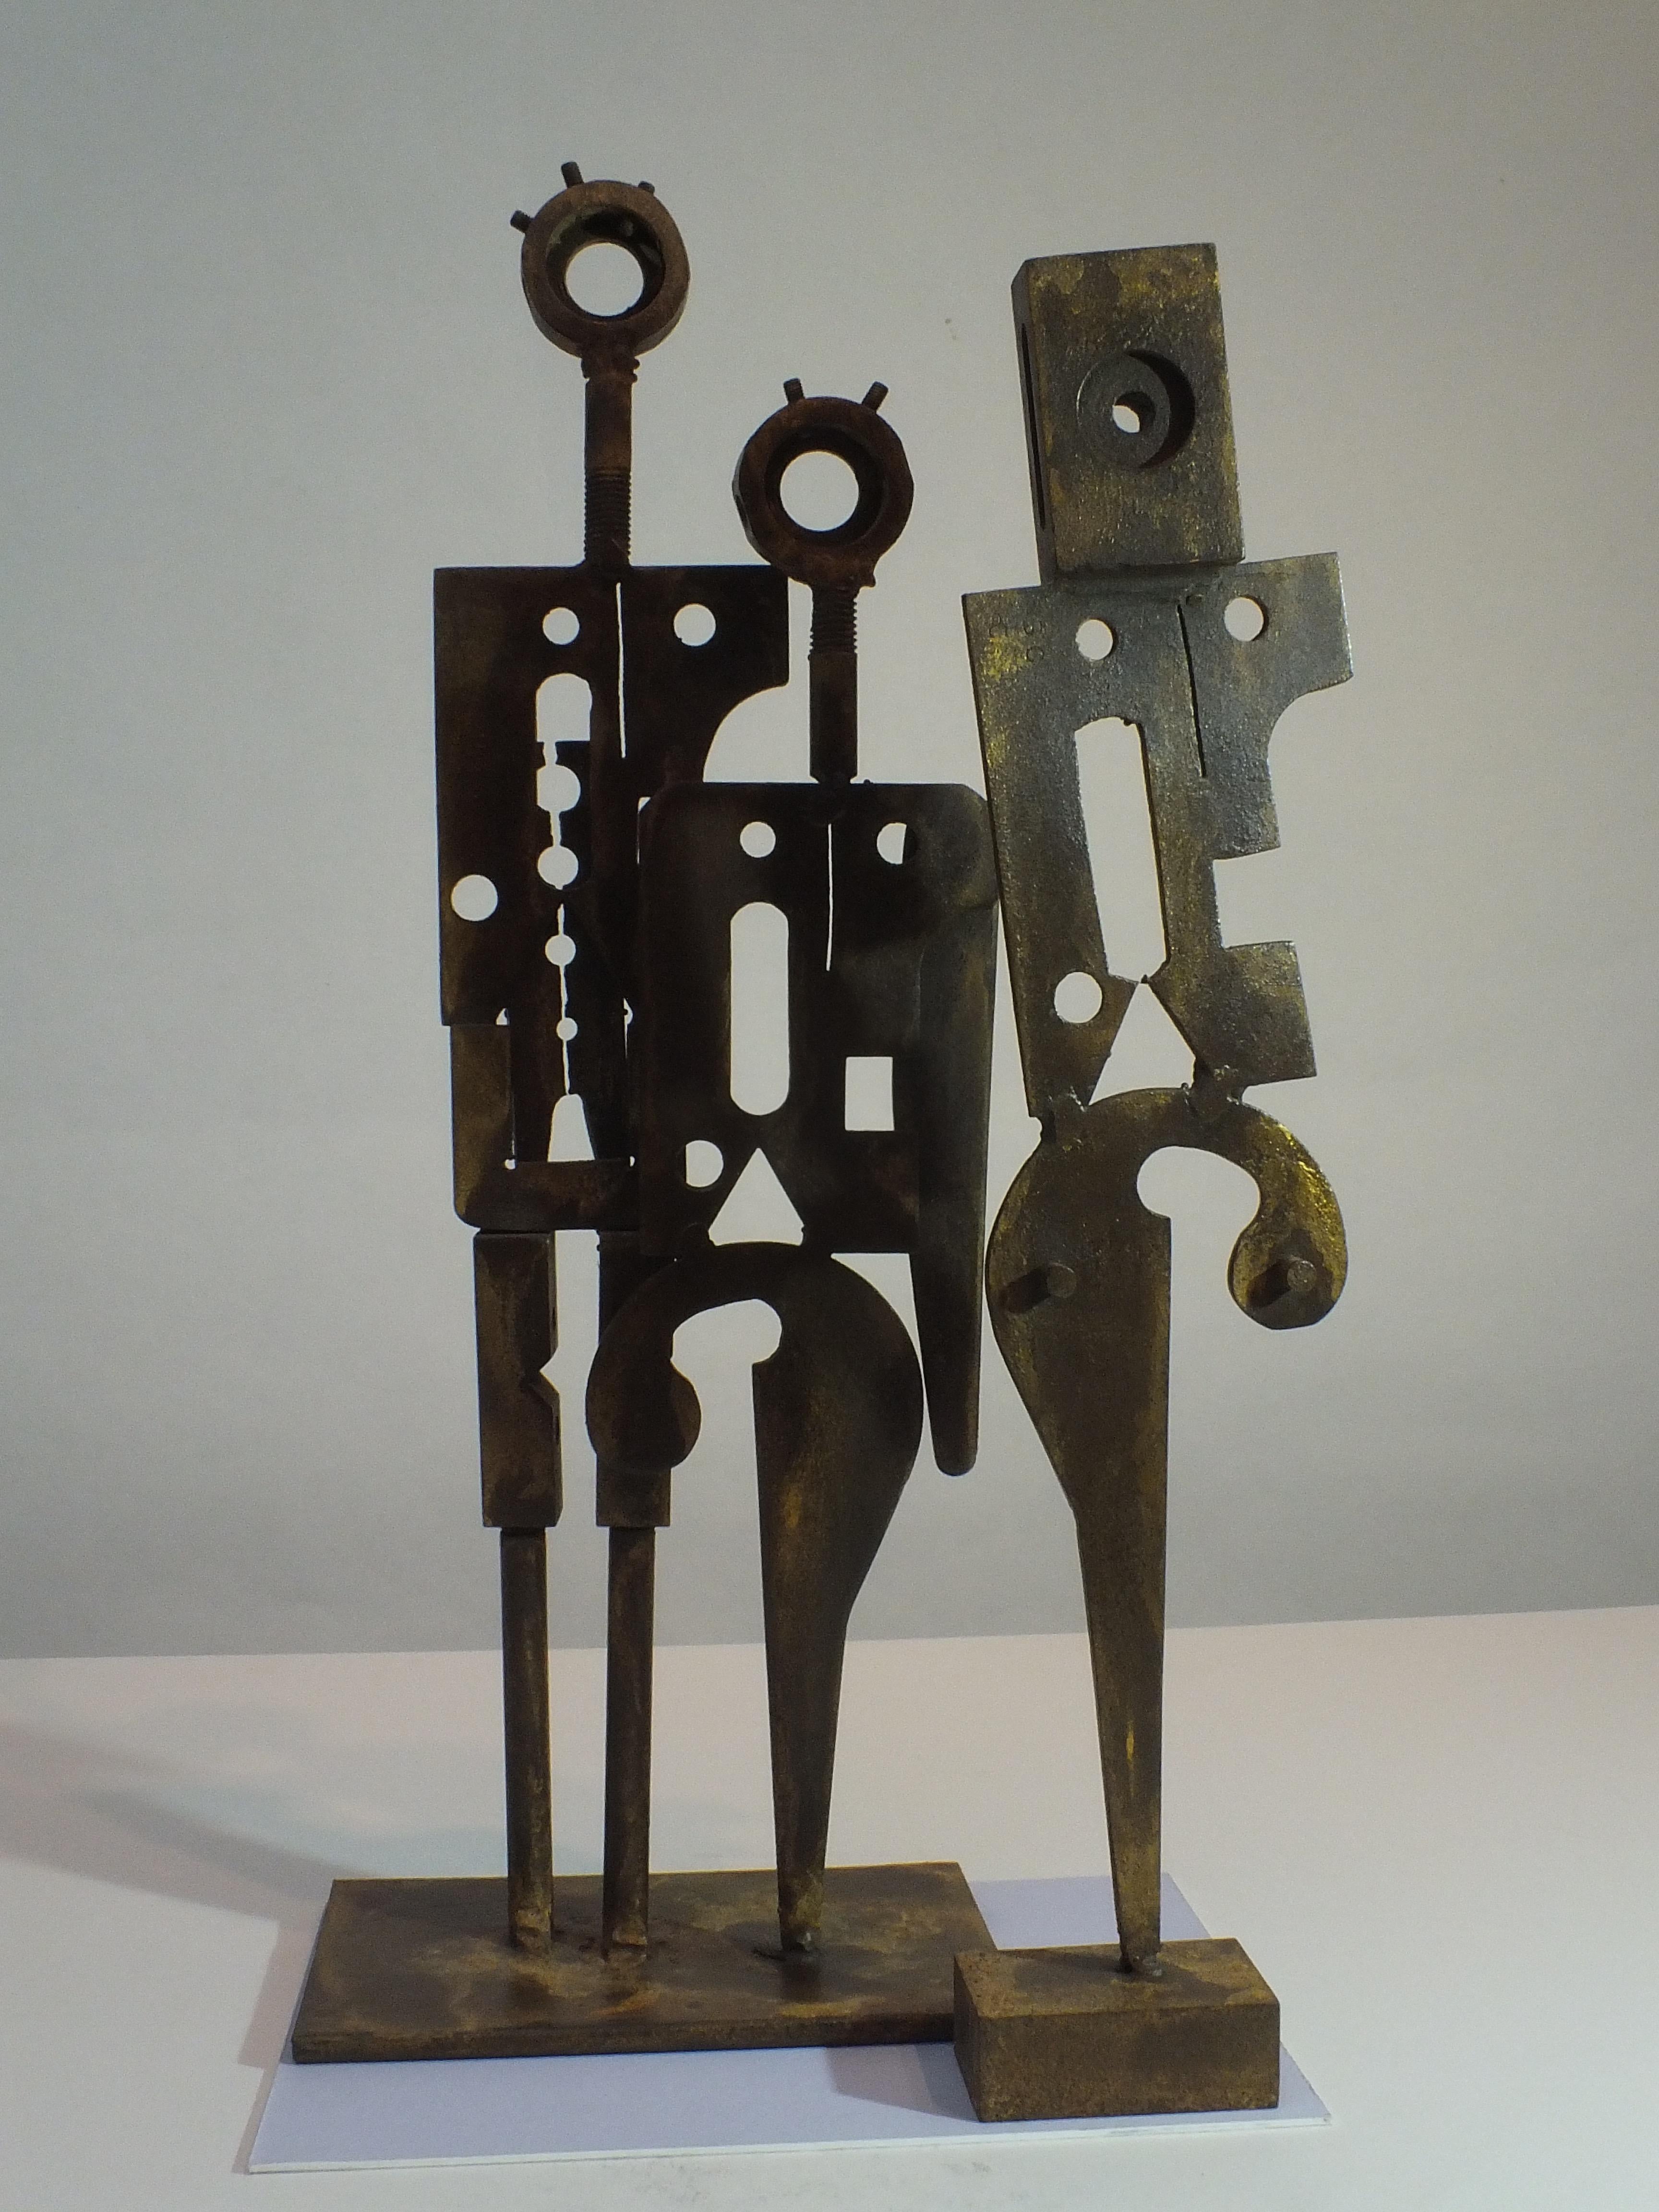 This 2-piece solid steel sculpture is a far more industrial, angular work from Rawlins. Perhaps looking at how people have evolved from earlier more simple eras into today's era of the machine and our reliance on them. However, the piece is not a